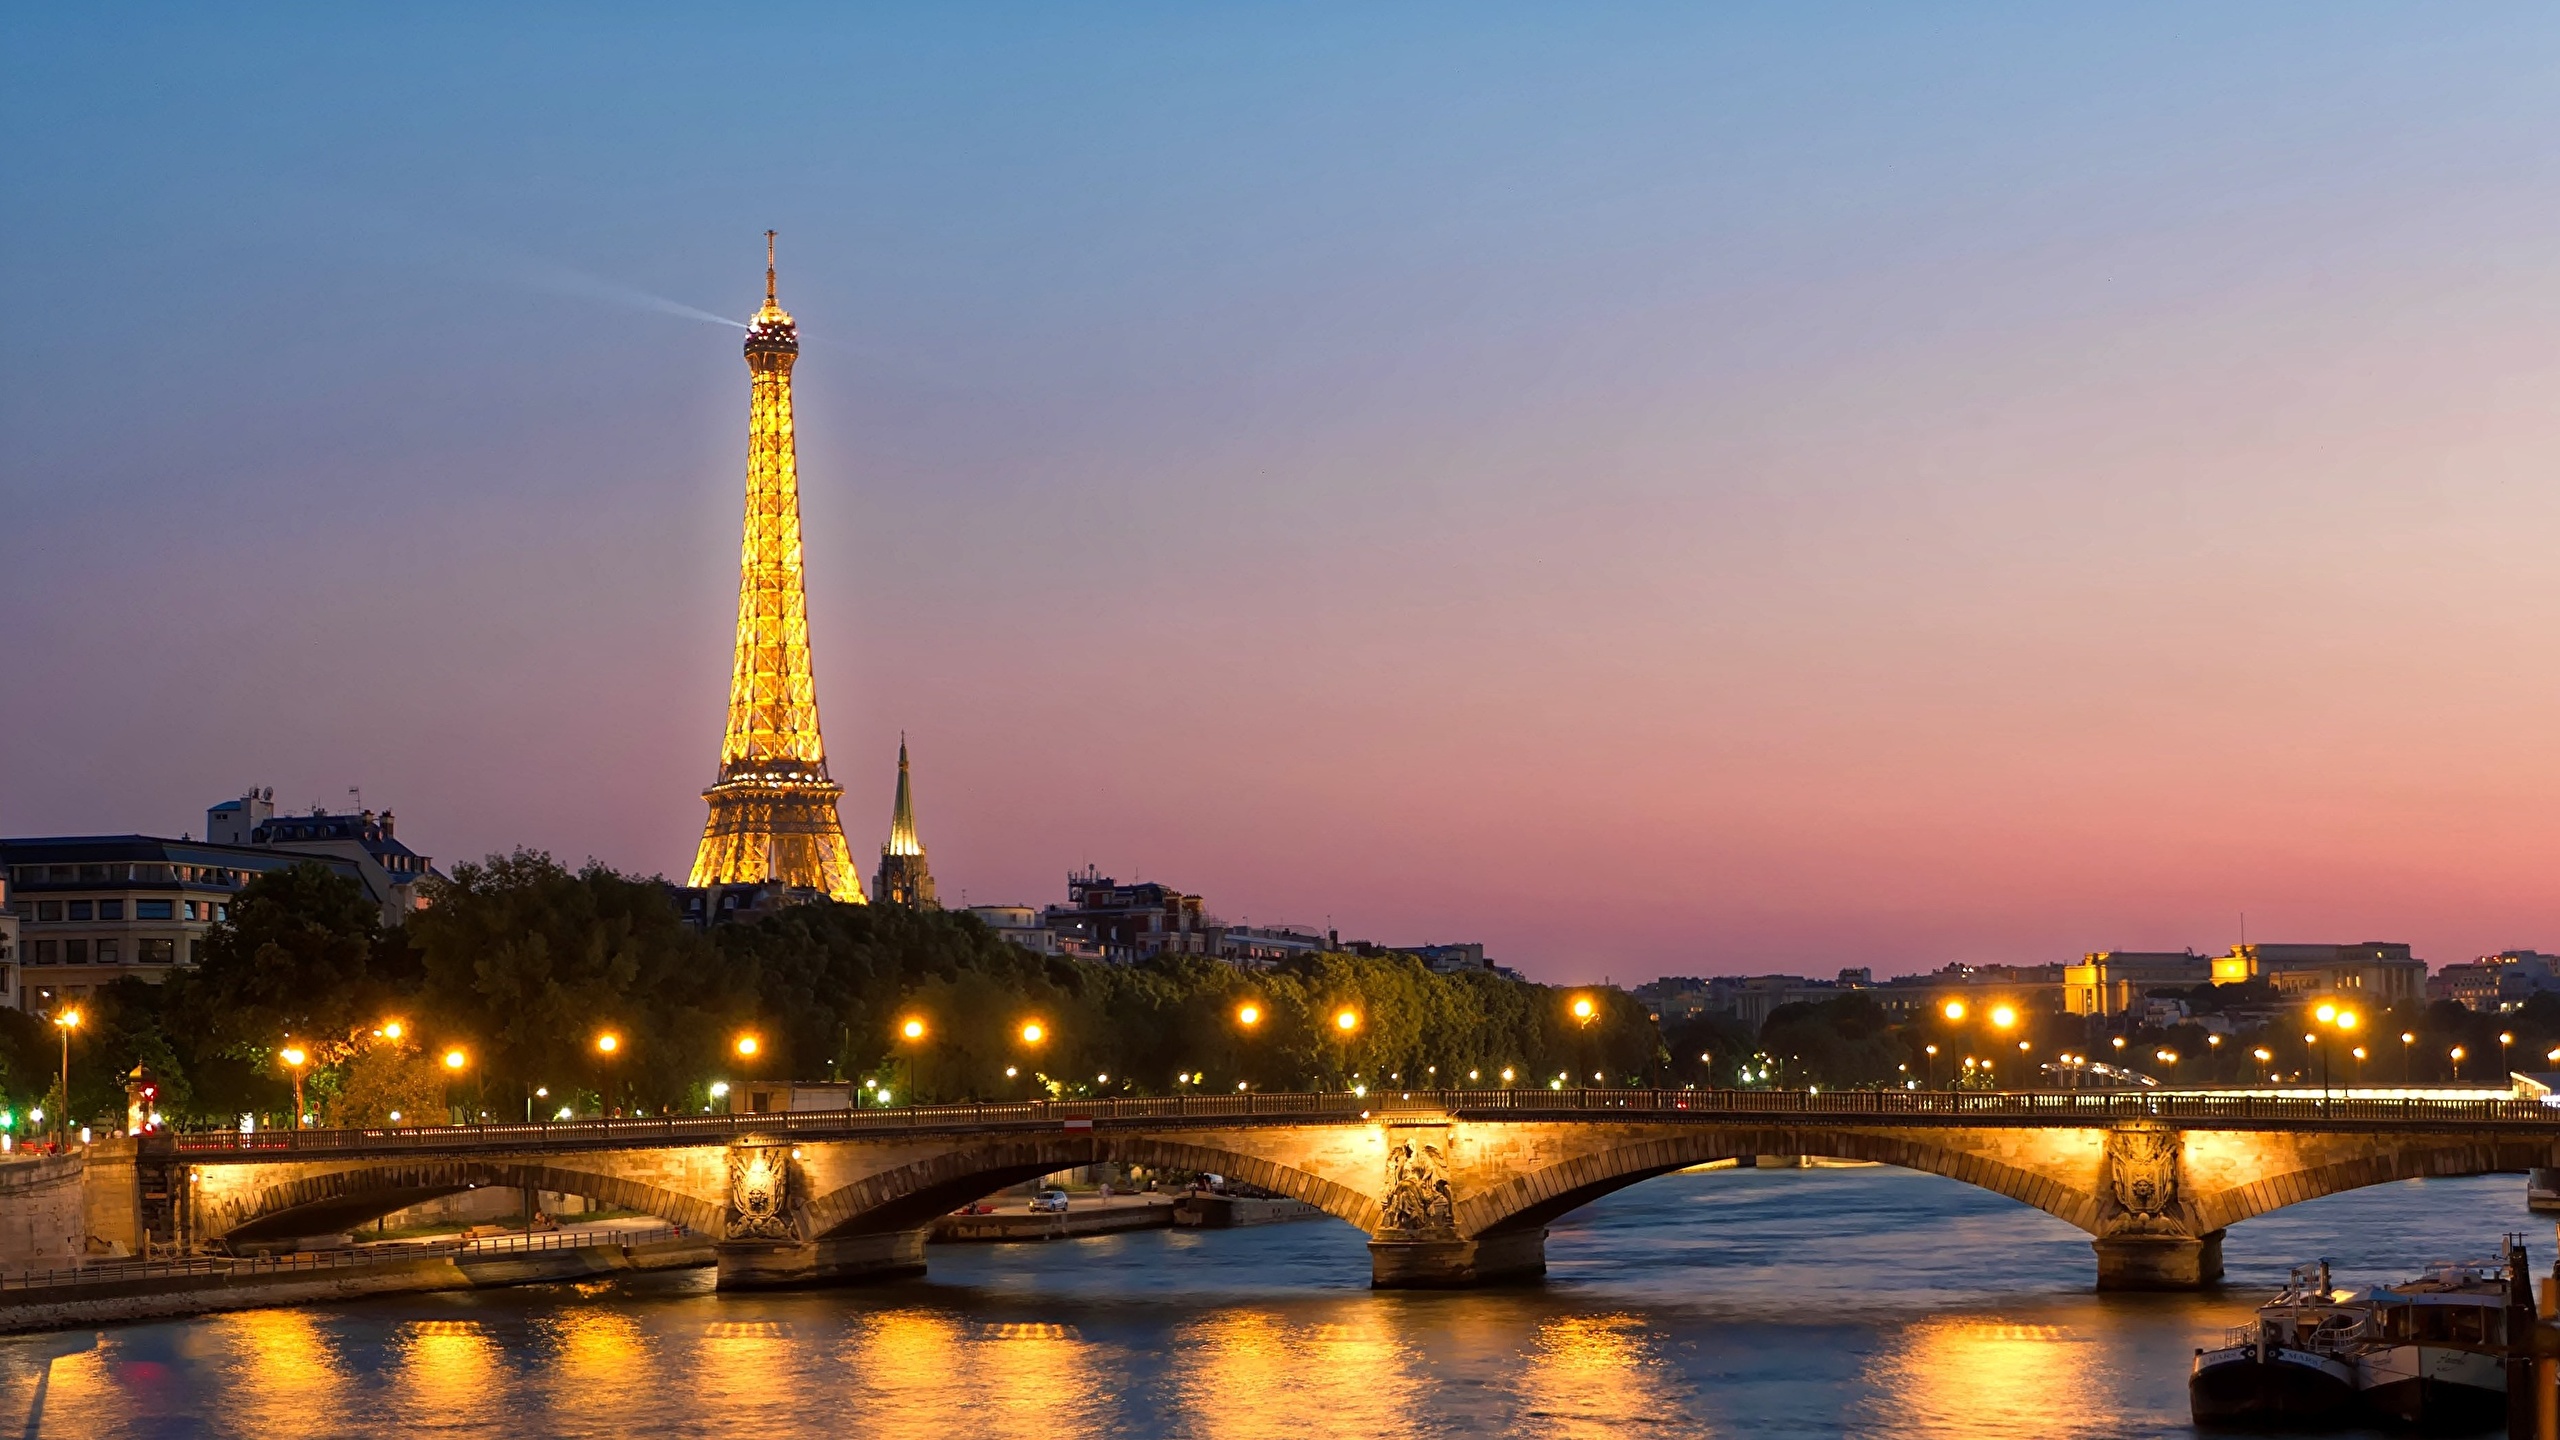 Beautiful Picture Of The Eiffel Tower - HD Wallpaper 